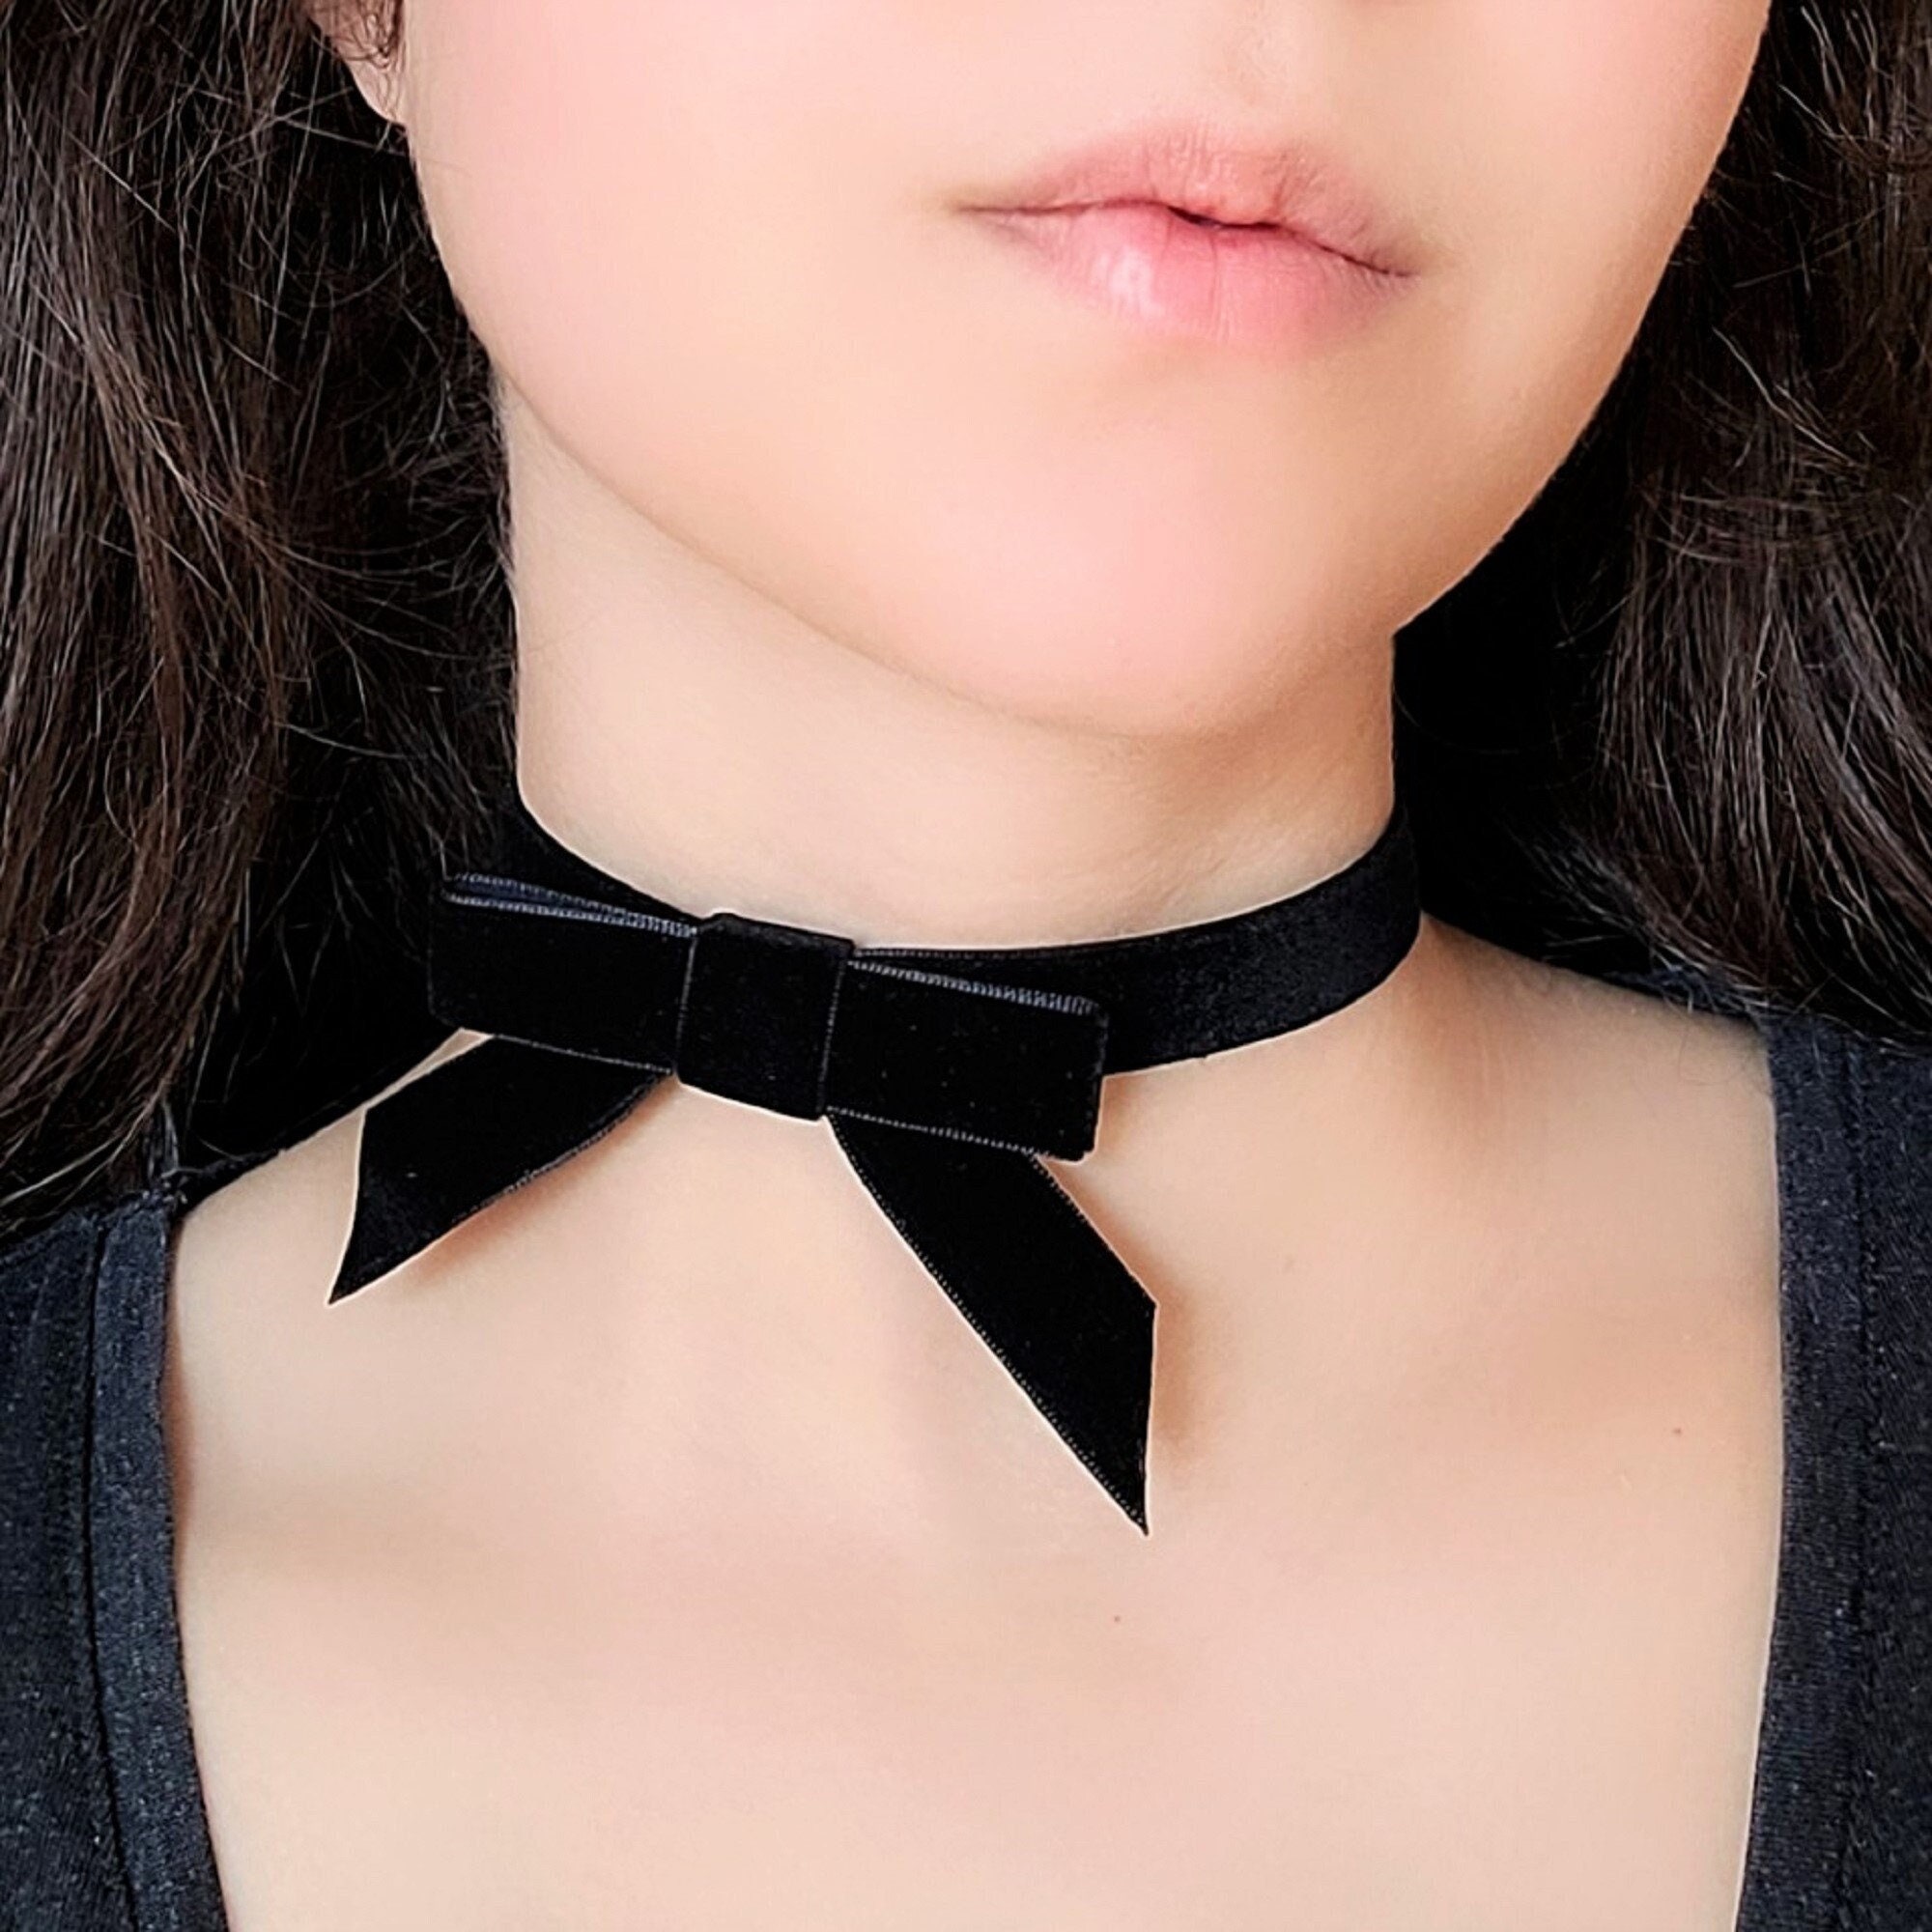 Gothic Lolita Bow Choker, Black Satin Ribbon Bow Necklace, Victorian Choker,  Emo Mall Goth Necklace, Coquette Kawaii Necklace -  Norway